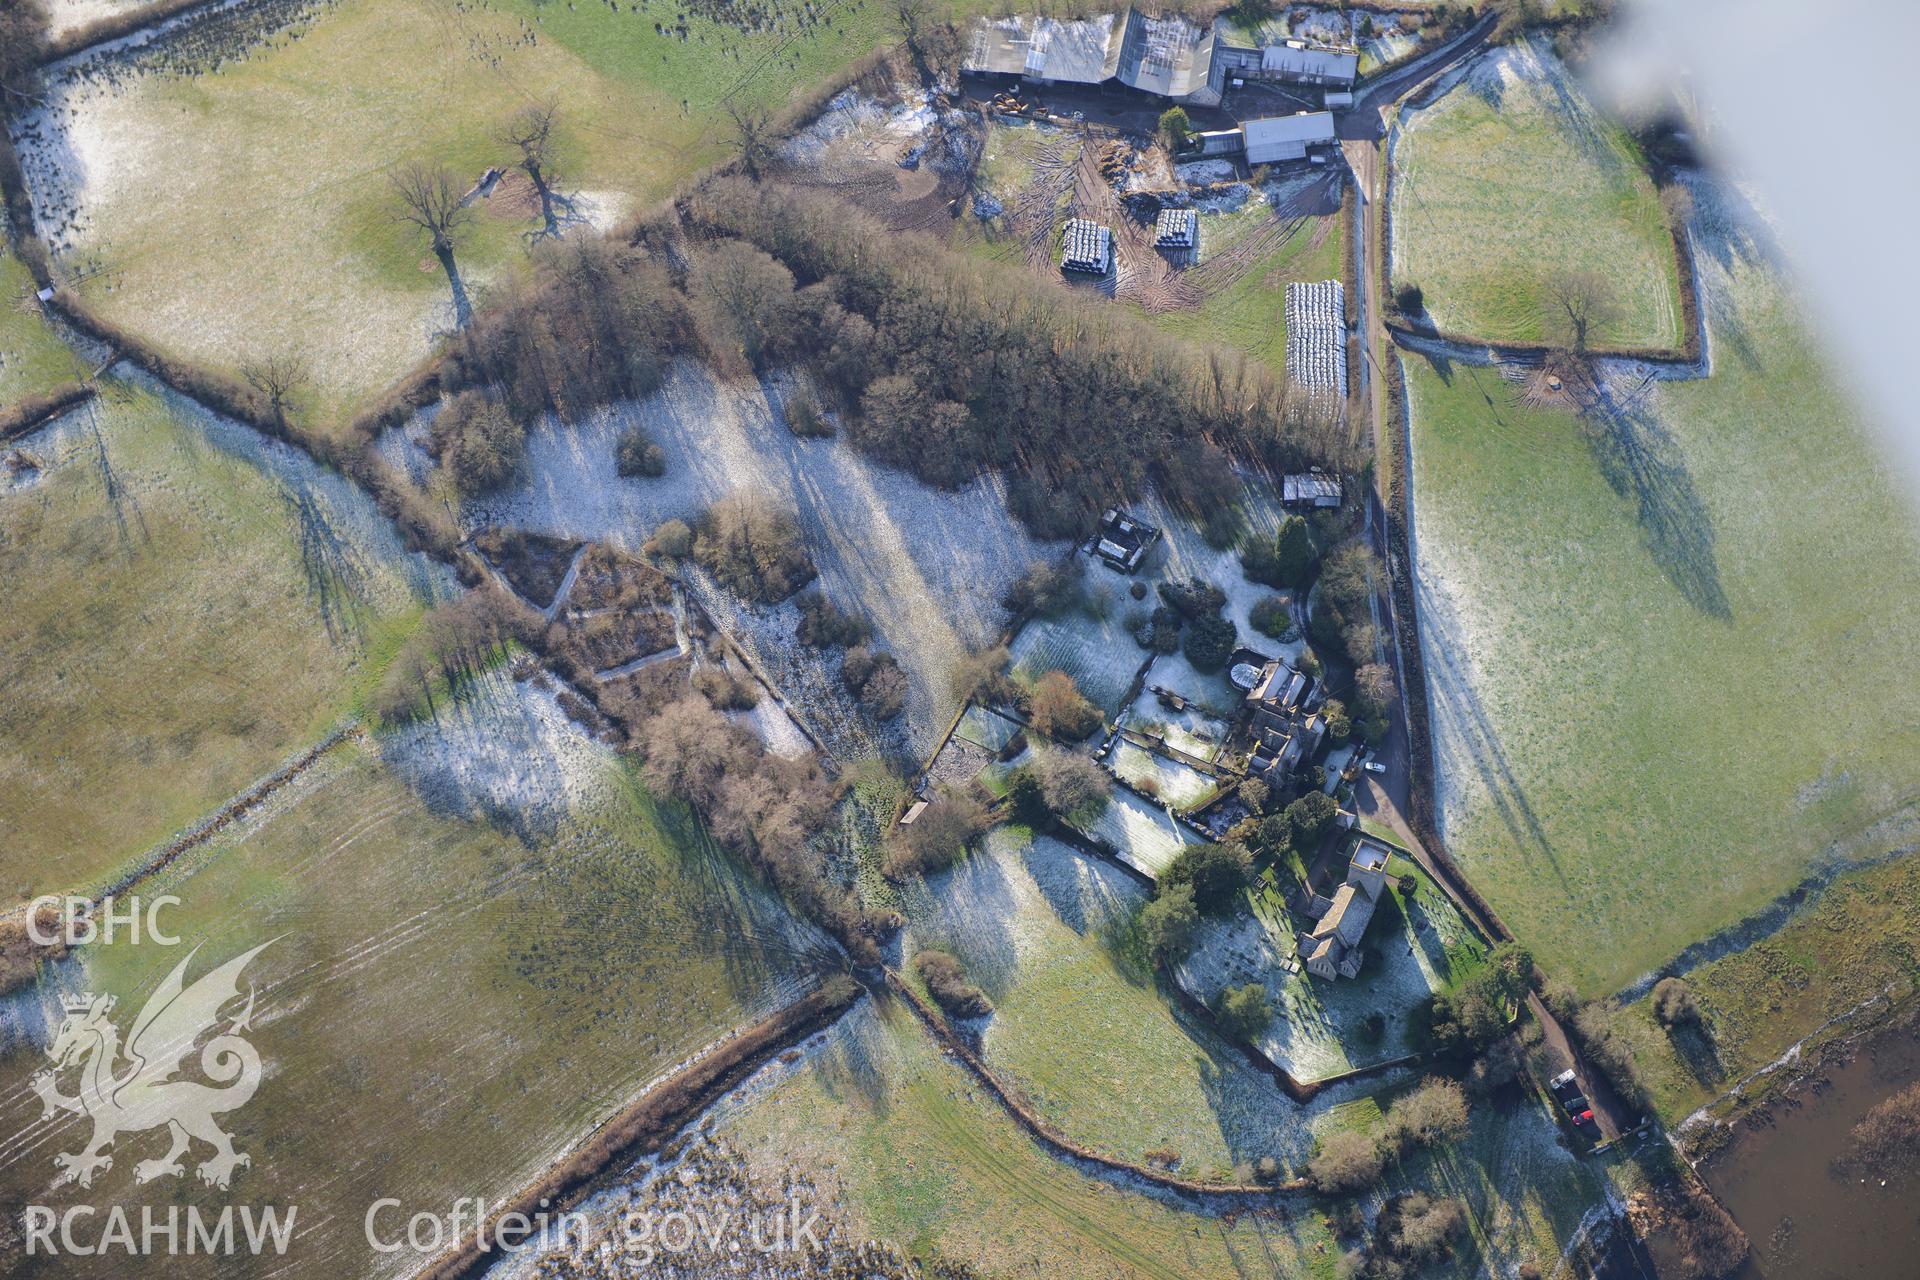 St. Gastyn's church, the village of Llangasty-Talyllyn and surrounding fields, south east of Brecon. Oblique aerial photograph taken during the Royal Commission?s programme of archaeological aerial reconnaissance by Toby Driver on 15th January 2013.